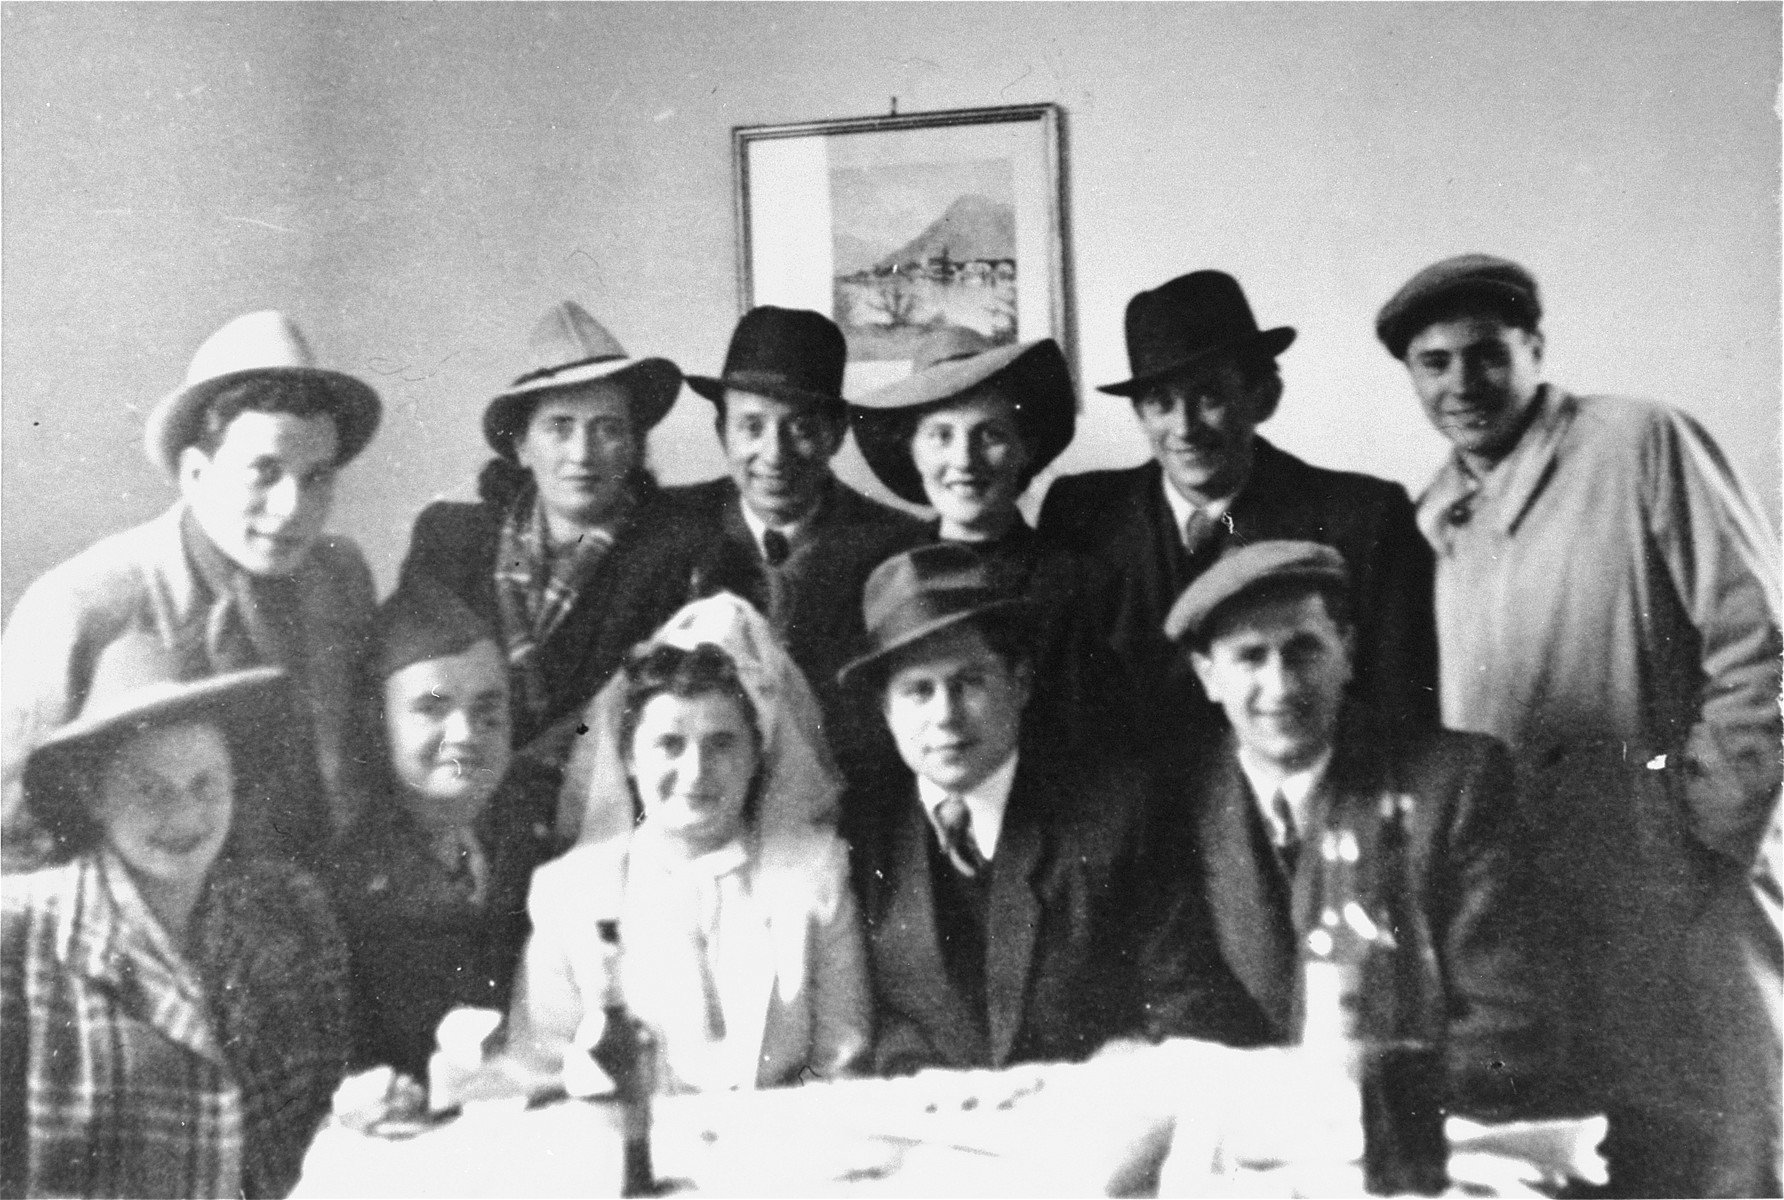 Group portrait of family and friends at the wedding of Regina and Sam Spiegel at the Foehrenwald displaced persons camp. 

Among those pictured is David Bajer (front row, far right), and Ester and Israel Korman (back row, second and third from the right).